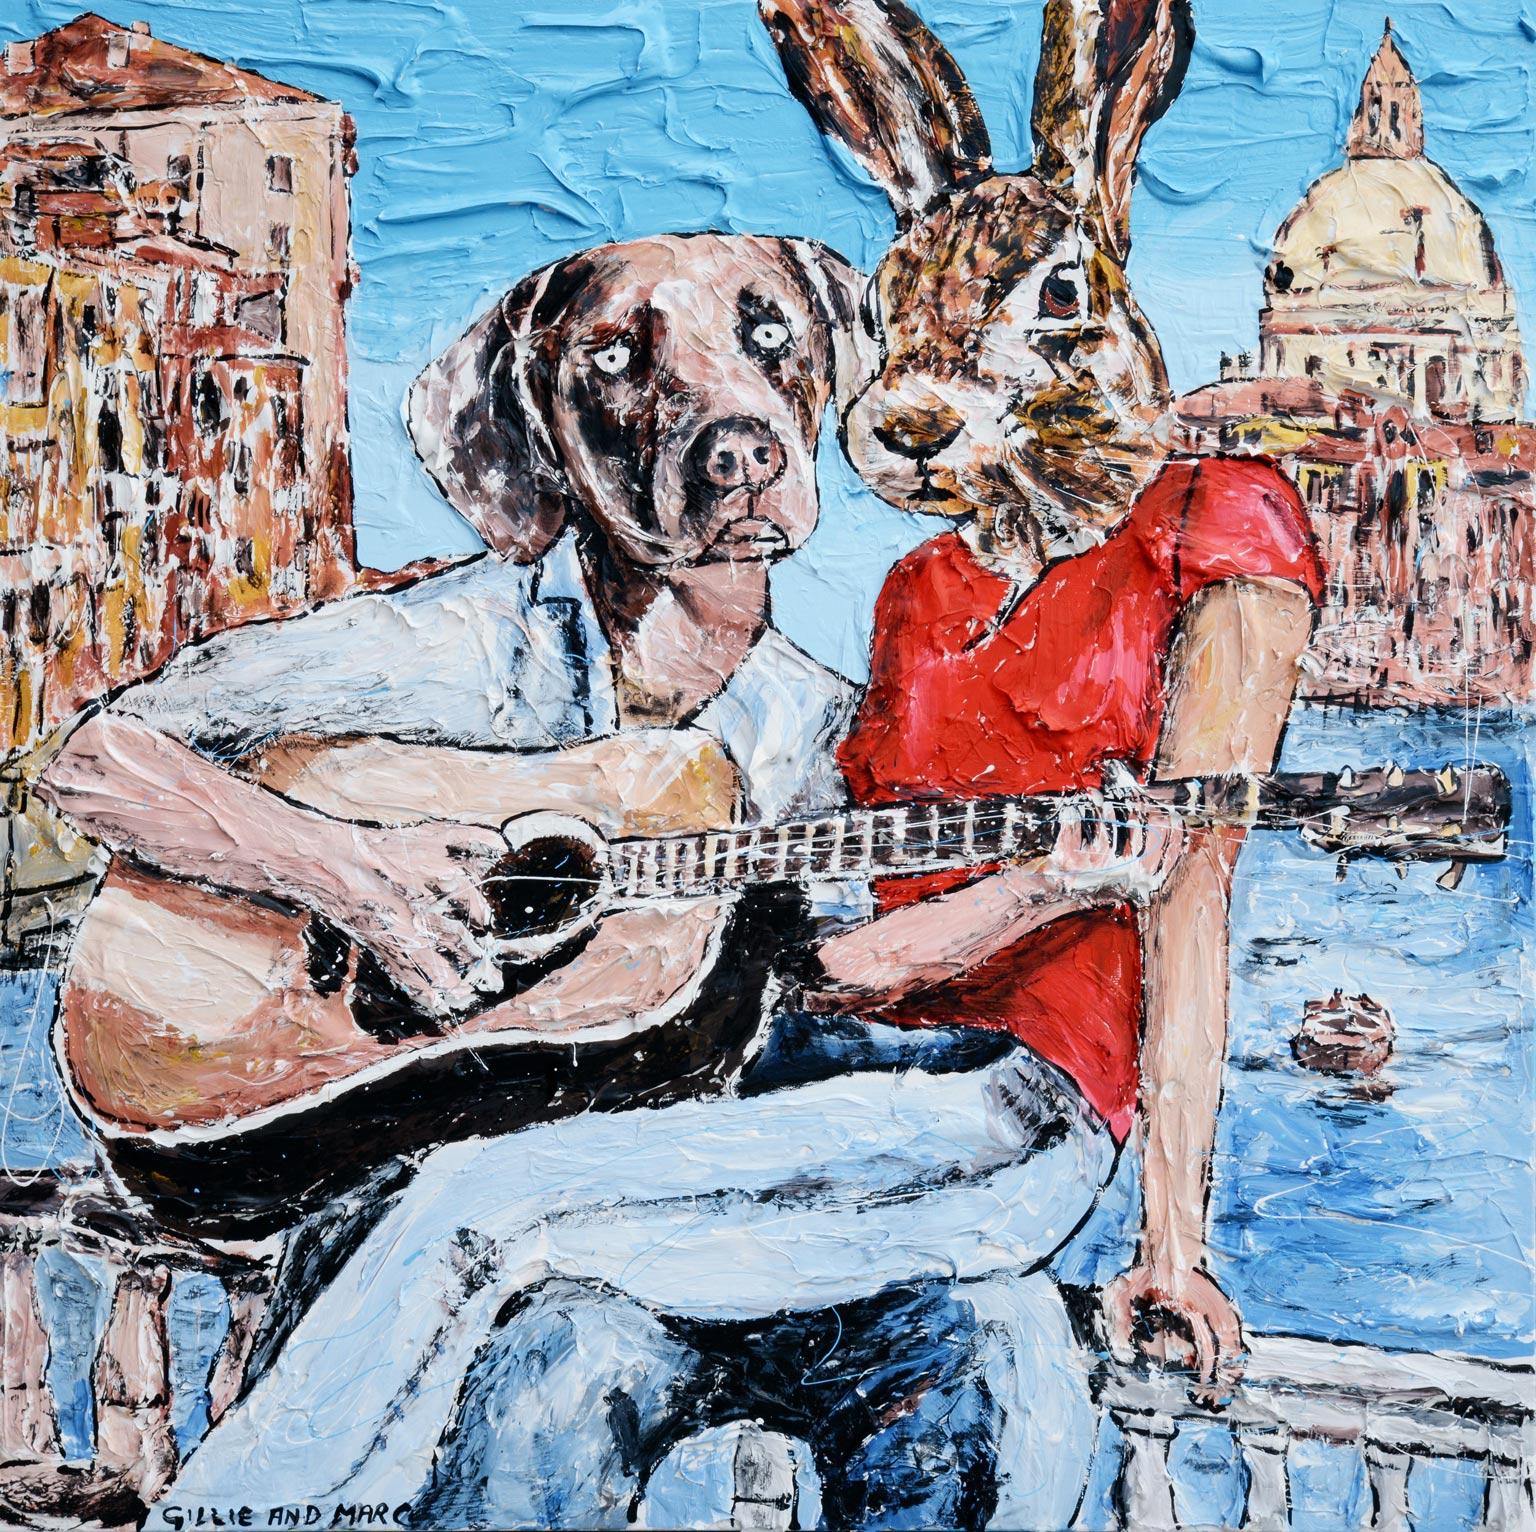 Gillie and Marc Schattner Figurative Print - Animal Painting Print - Gillie and Marc - Limited Edition - Art - guitar 